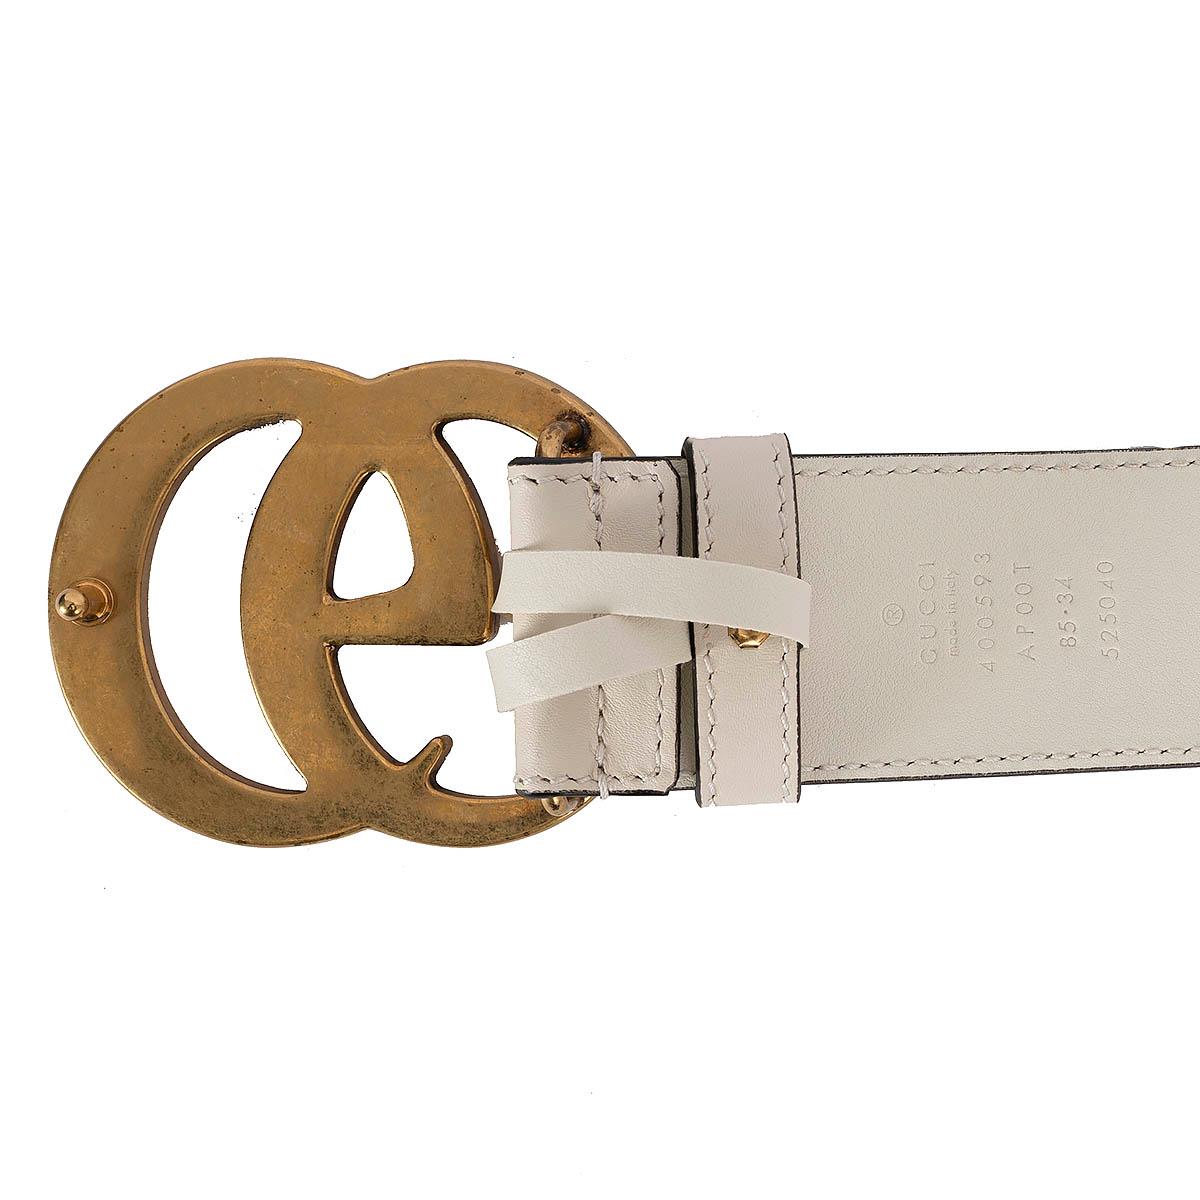 GUCCI cream leather GG MARMONT Belt 85 For Sale 3